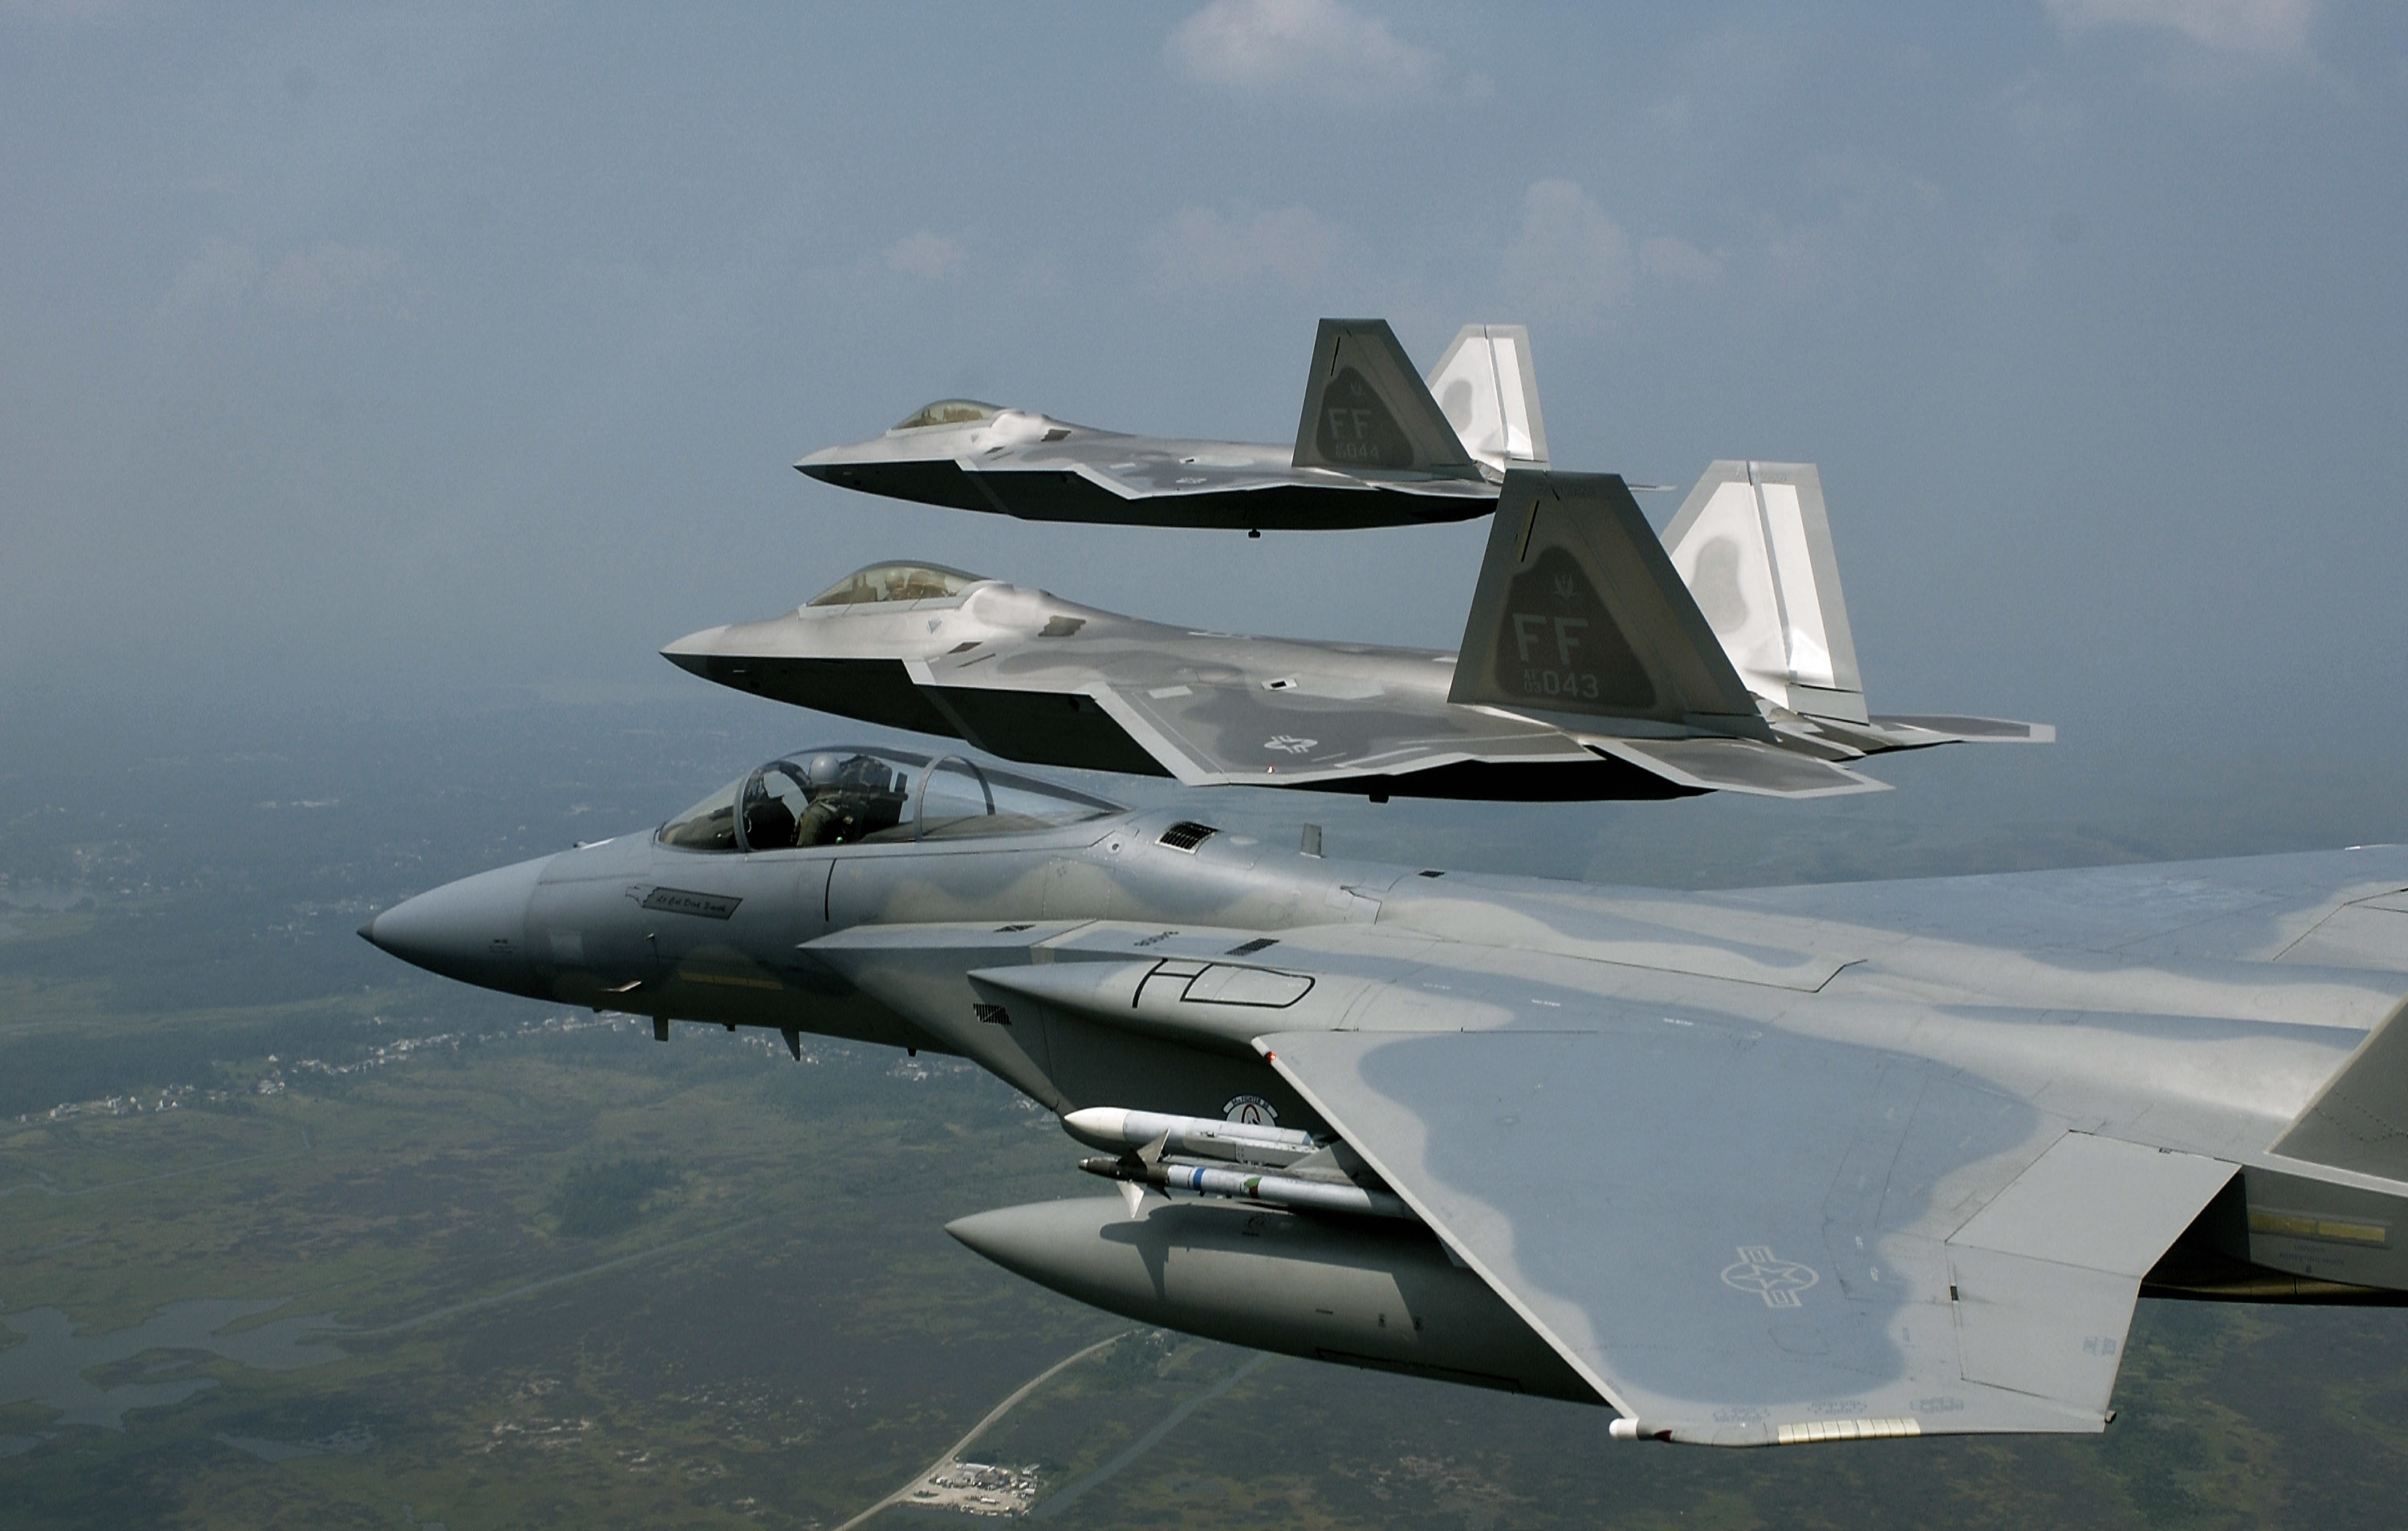 3000x1908 DOD defers F-22 funding decision to next administration